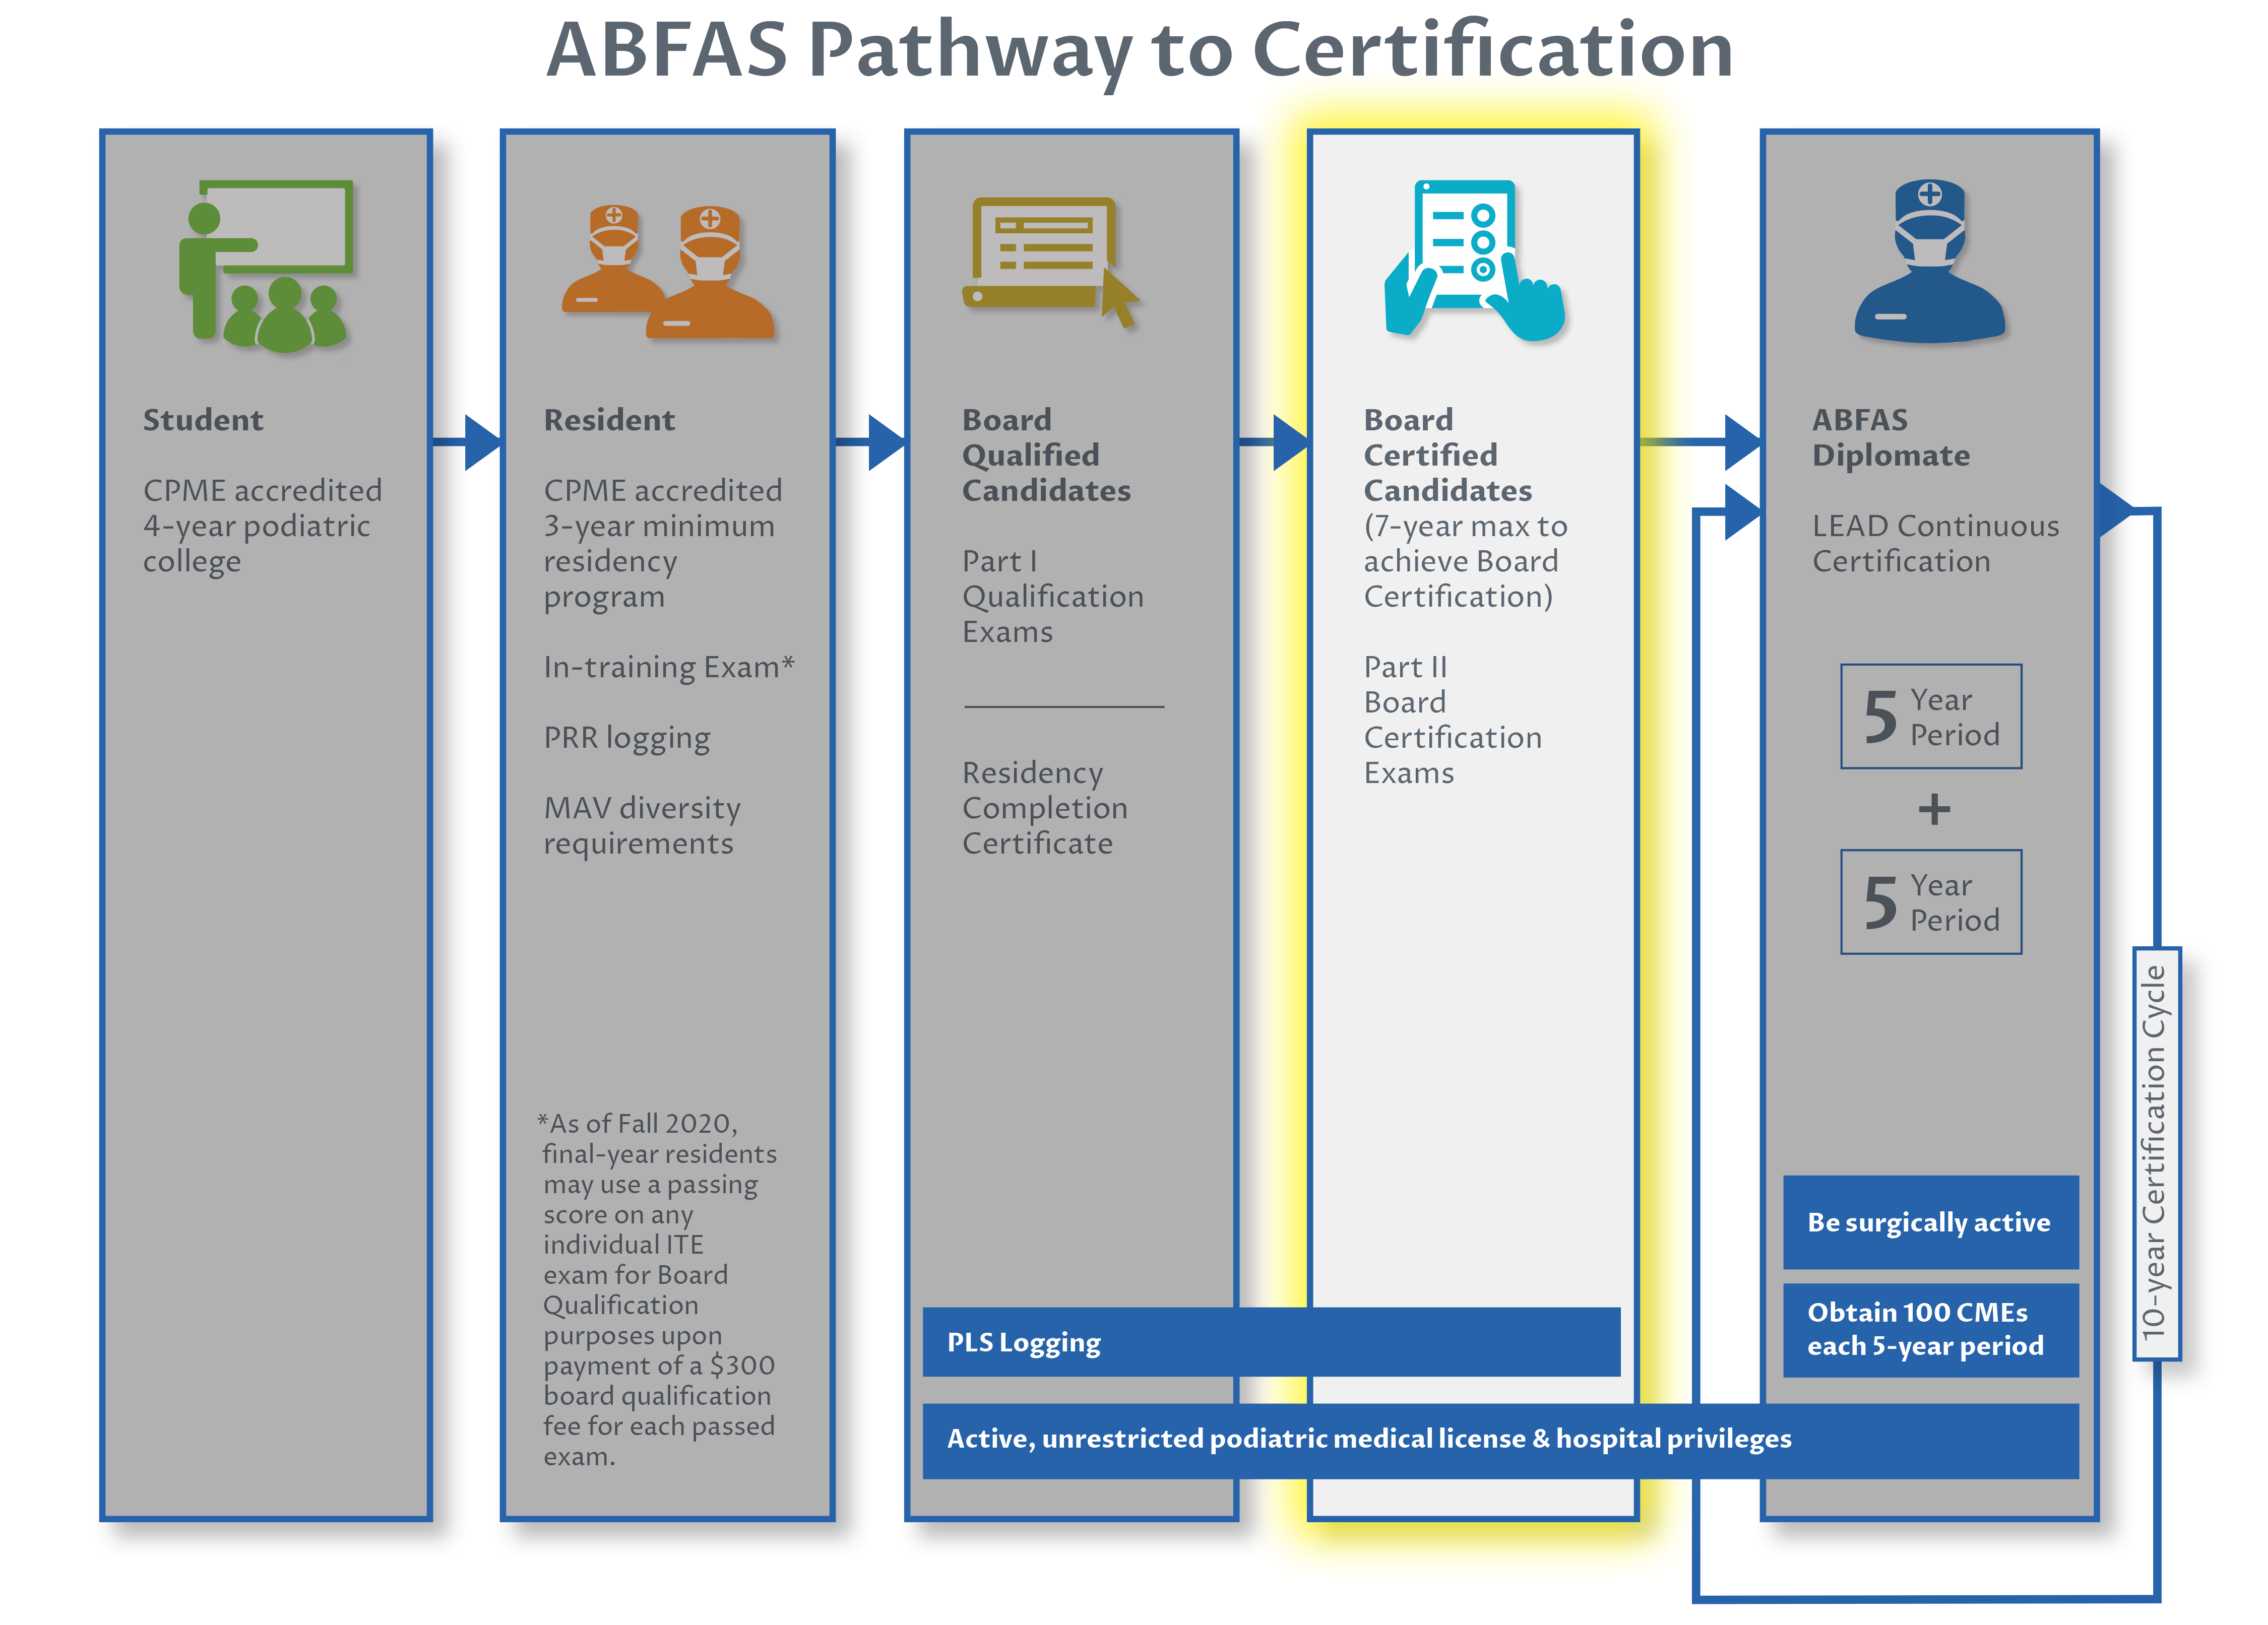 ABFAS Pathway to Certification for Board Certified candidates